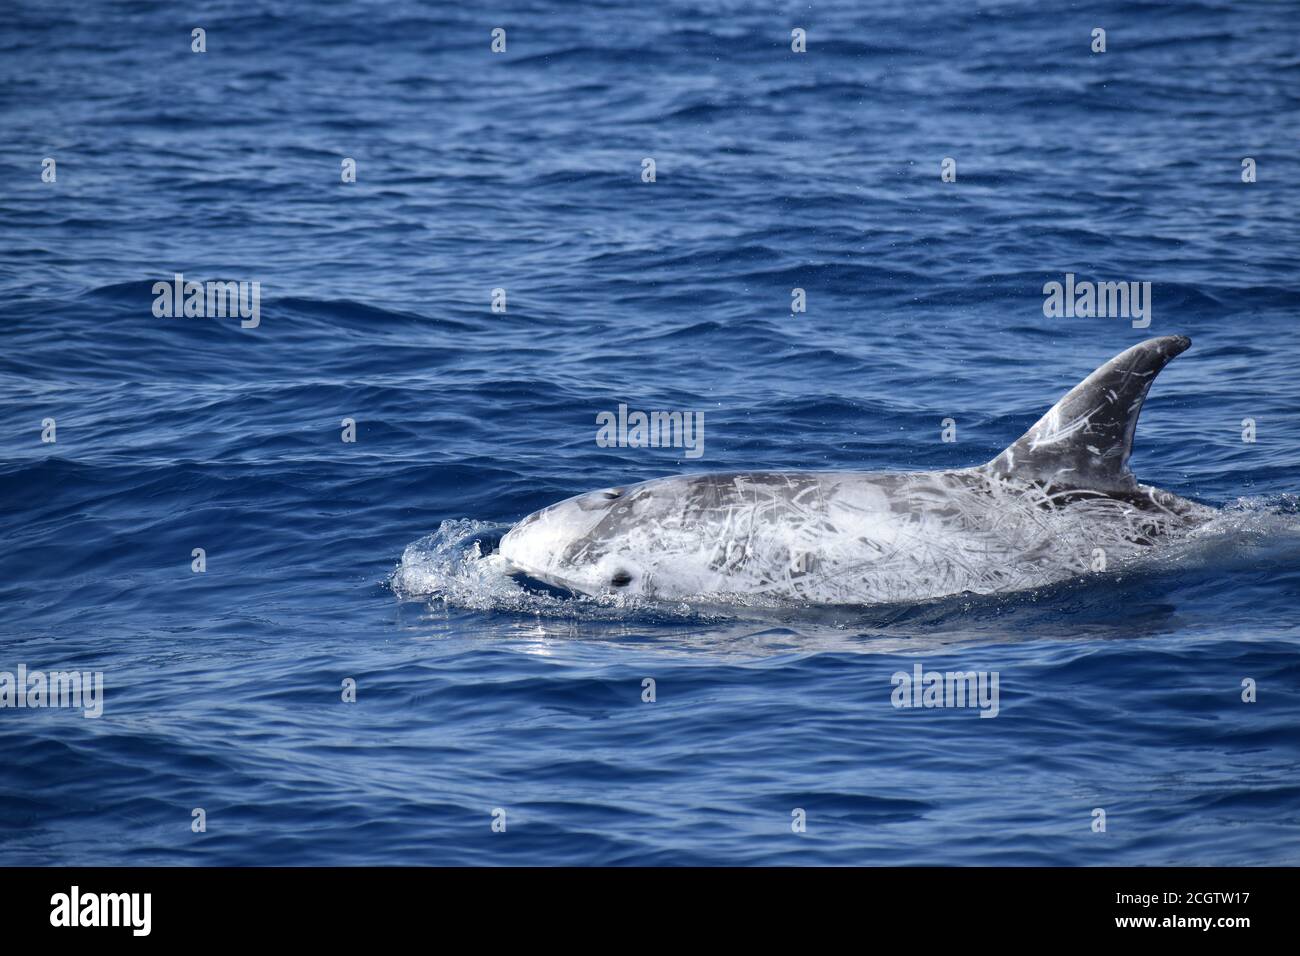 Risso's Dolphin (Grampus griseus) surfacing in Fuerteventura, the Canary Islands, March 2020 Stock Photo